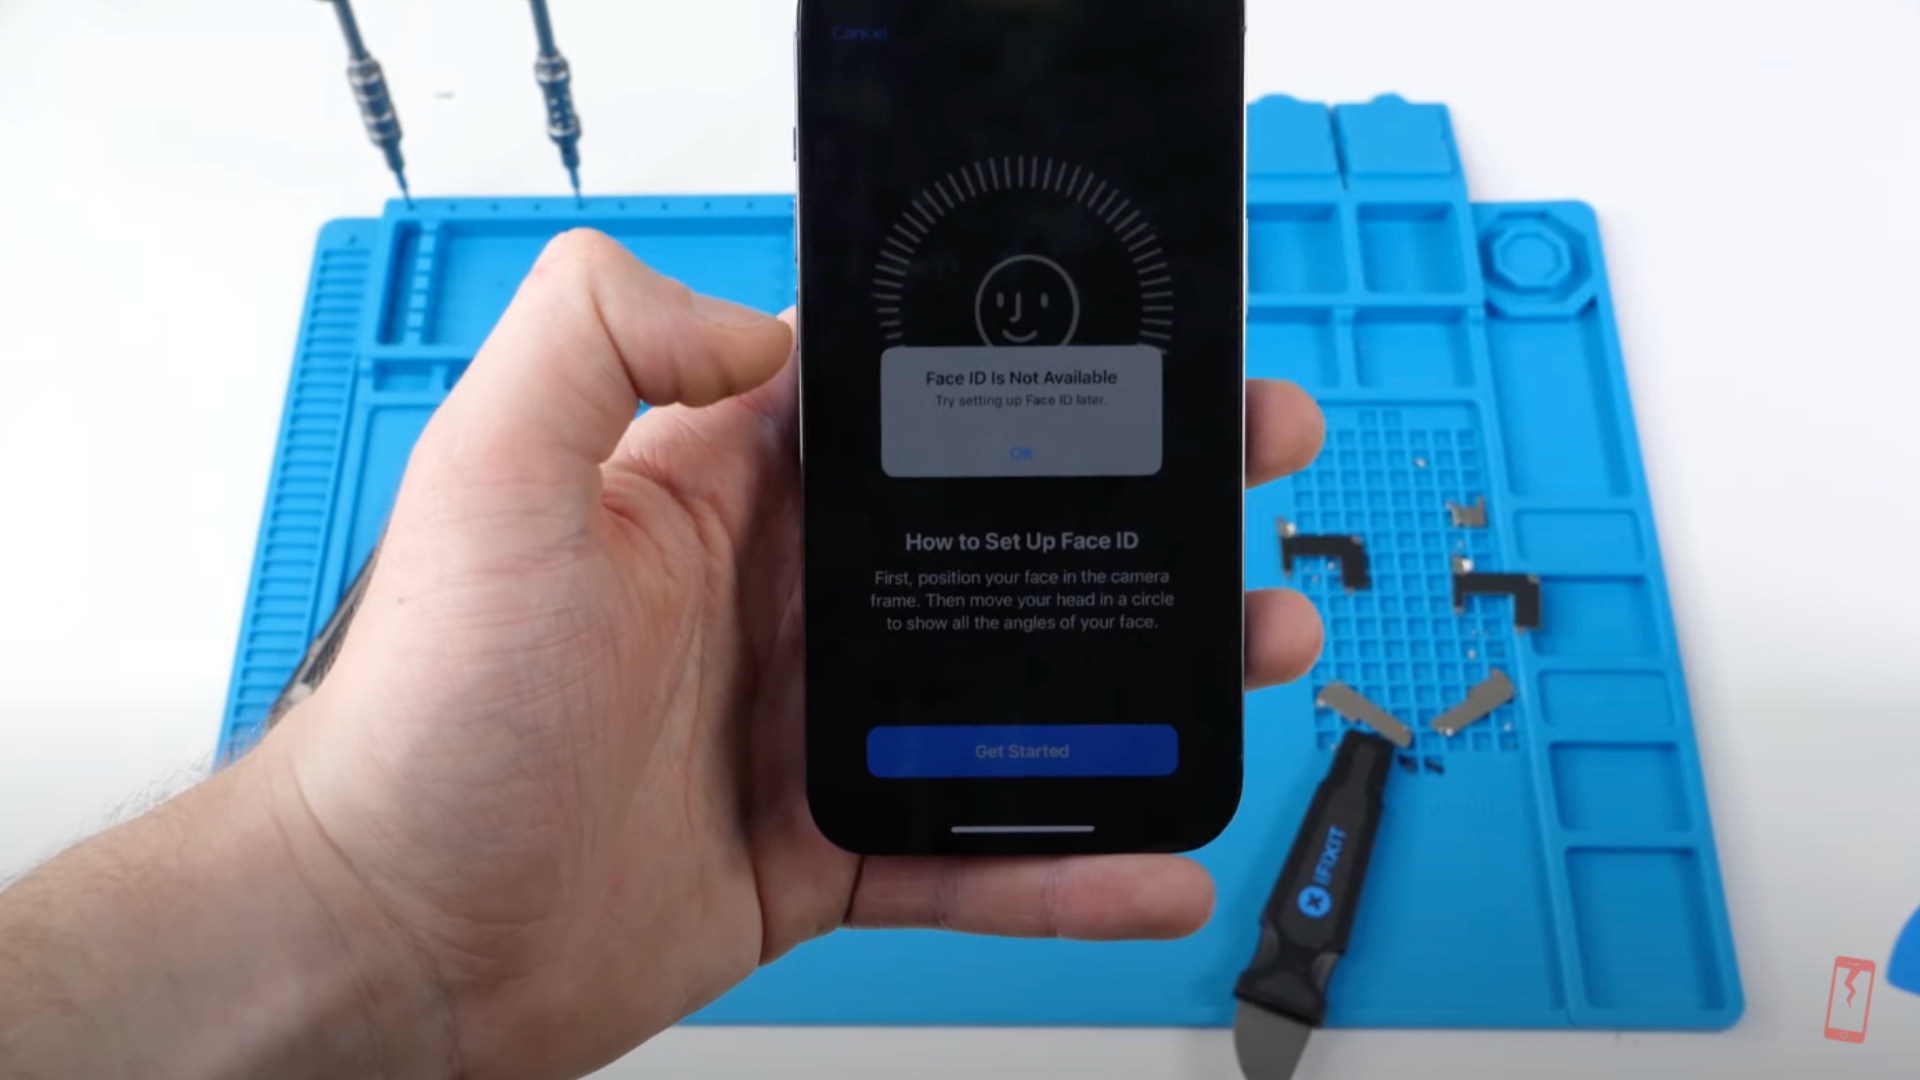 iFixit: Apple 'Locking' iPhone Batteries to Discourage Third-Party  Replacements [Updated] - MacRumors